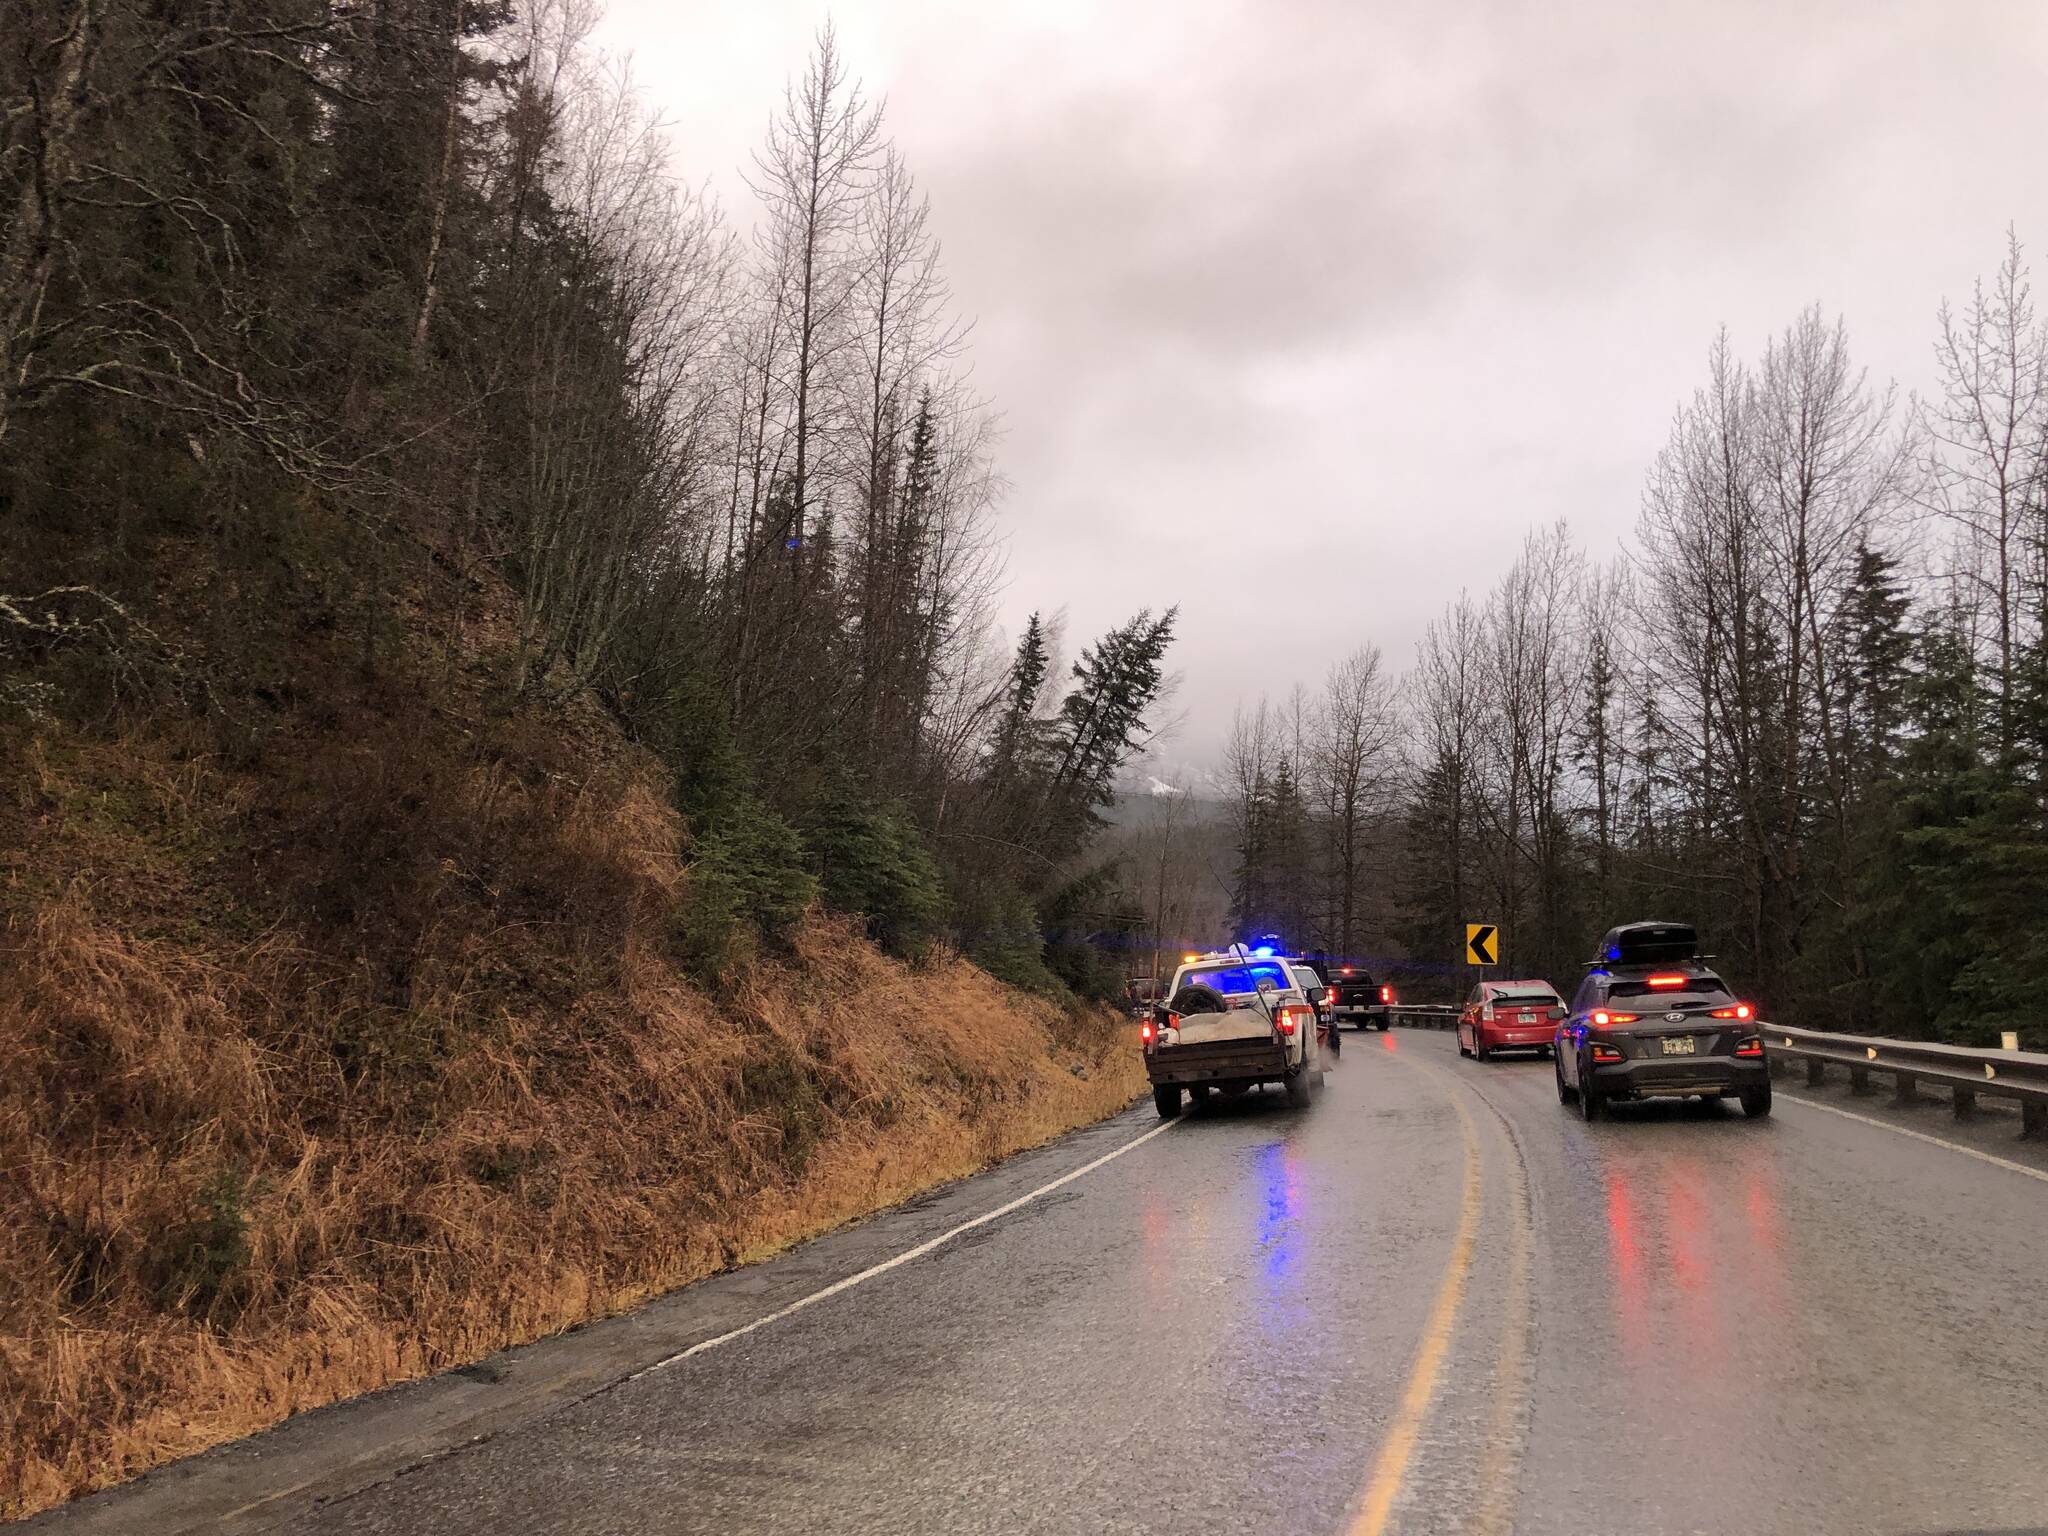 Cars wait while debris is cleared from a section of the Sterling Highway on Monday, Nov. 1, 2021 near Cooper Landing, Alaska. A landslide on Sunday morning blocked both lanes of the highway, which had partially reopened Monday. (Camille Botello/Peninsula Clarion)